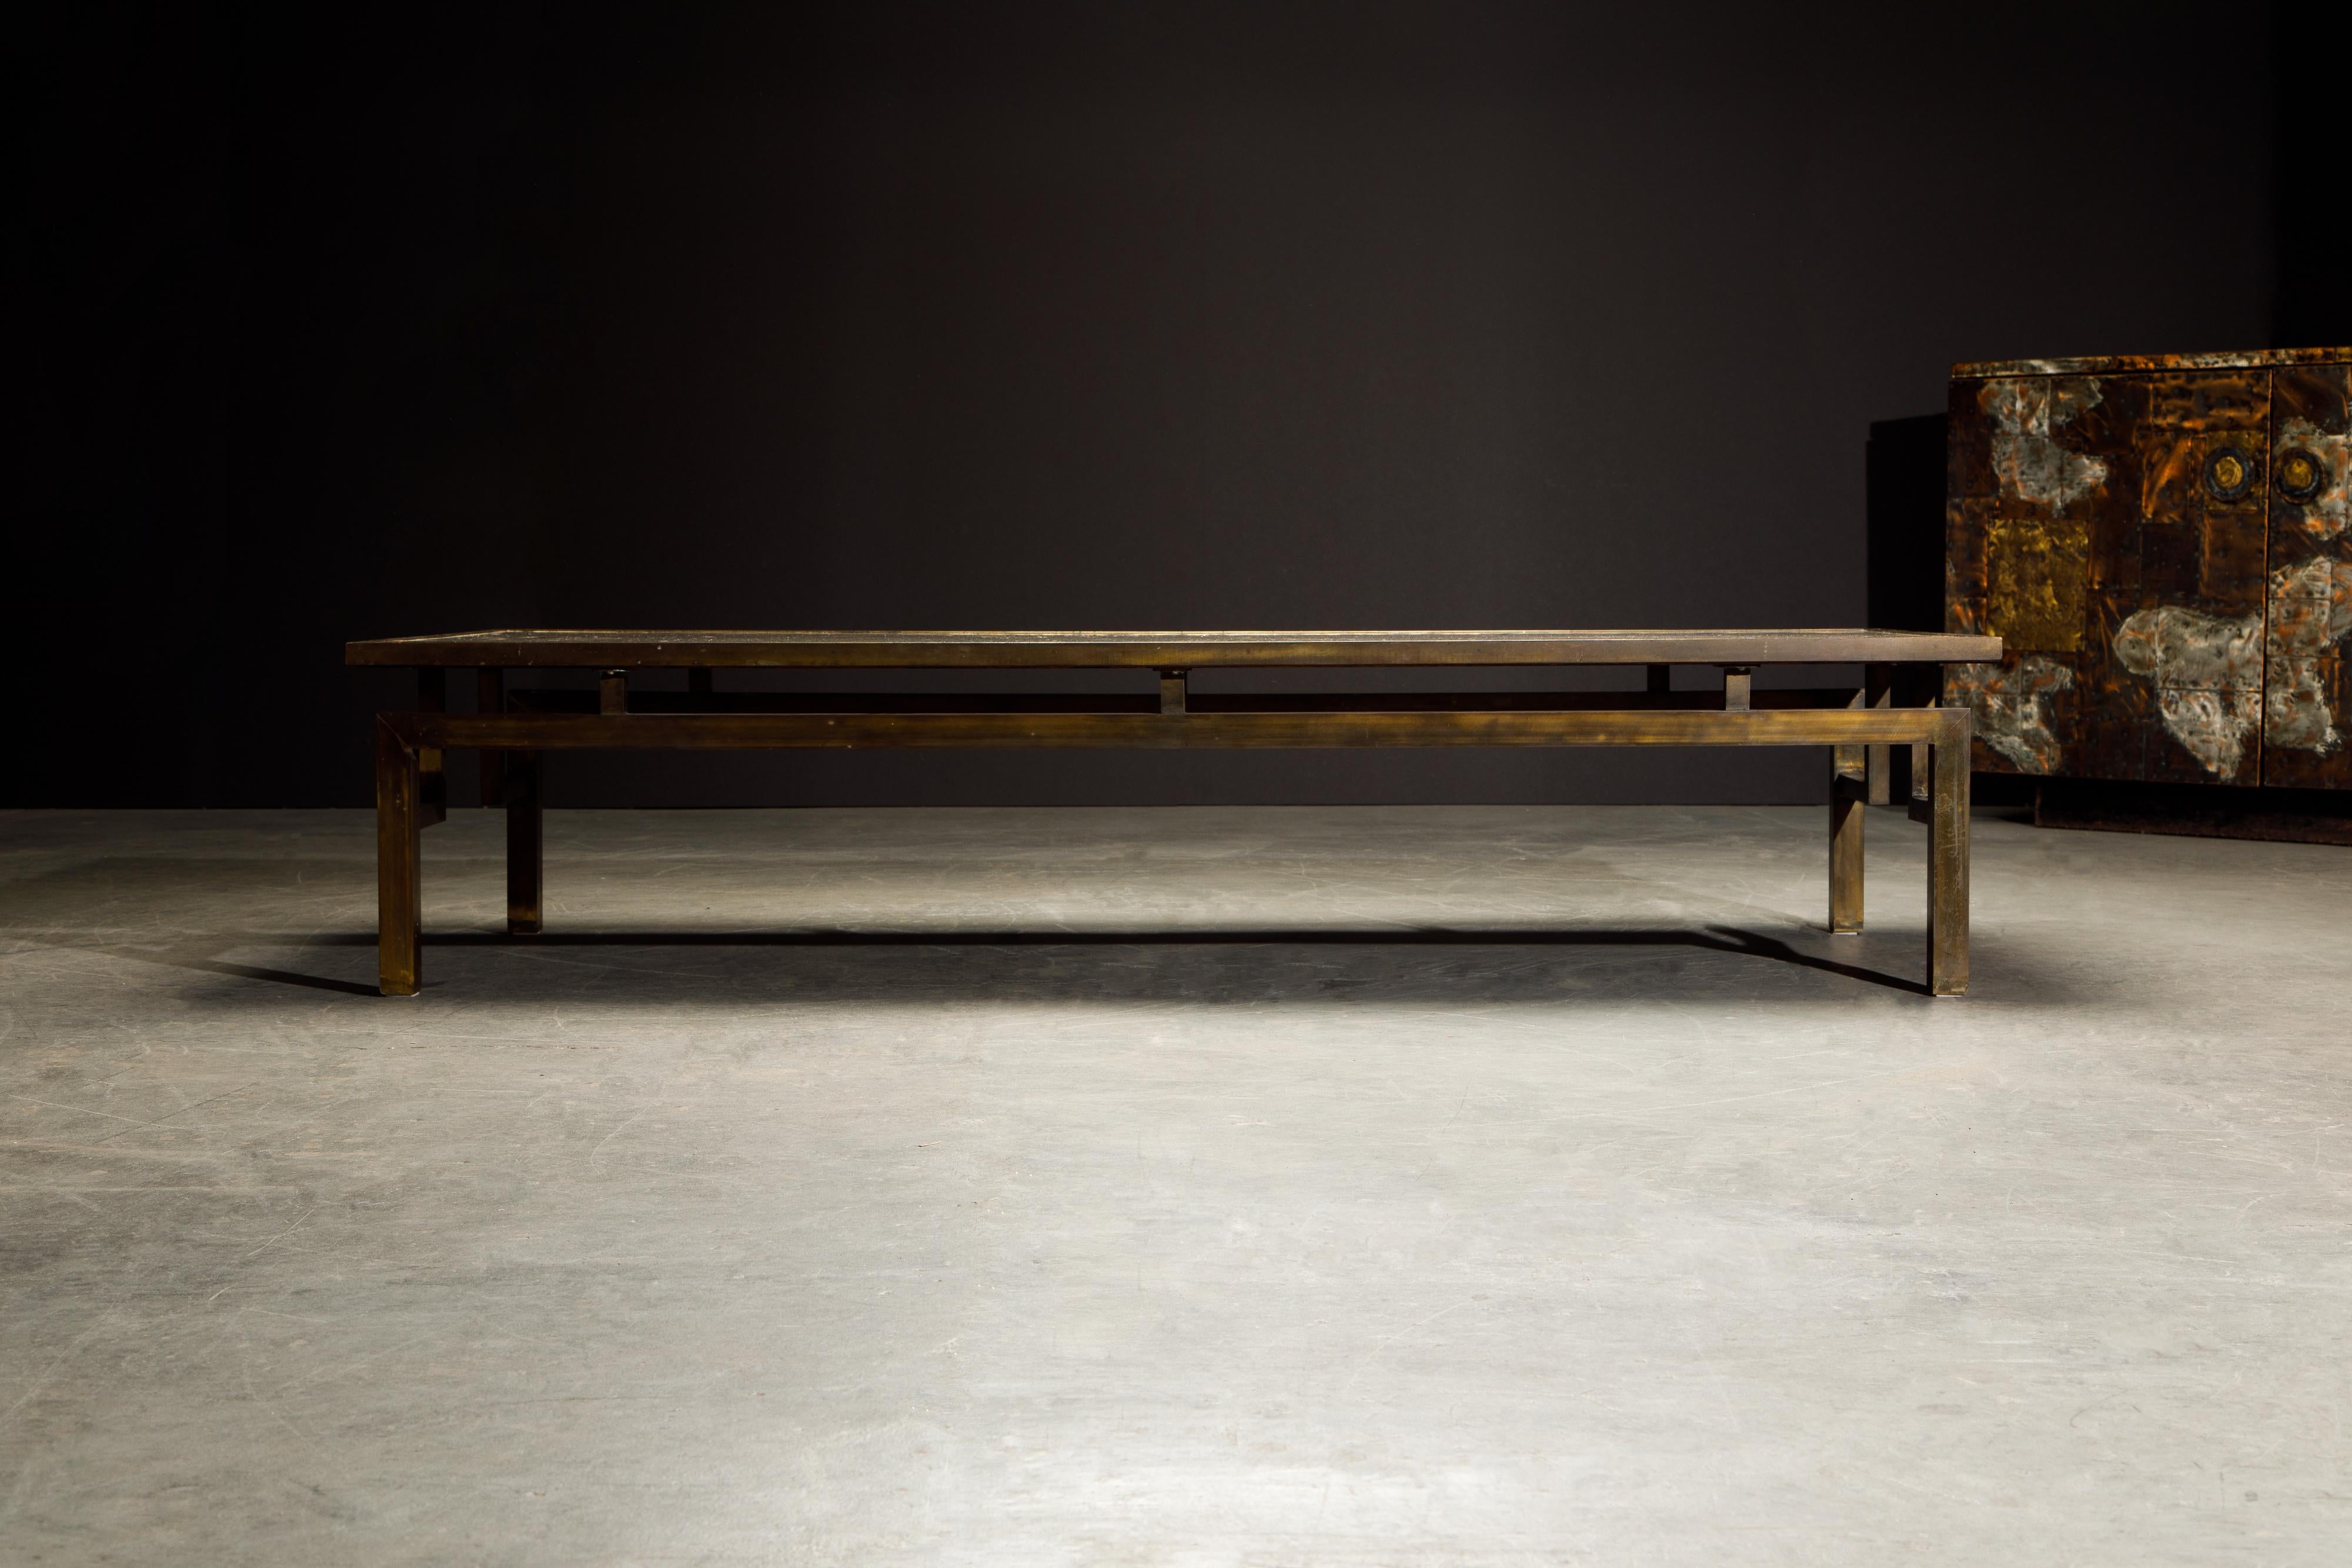 A rare example of the 'Classical' acid etched bronze cocktail table by Philip and Kelvin LaVerne utilizing the base style of the large rectangular 'Chin Ying' design, signed on the table top with the LaVernes signature. 

The large 70